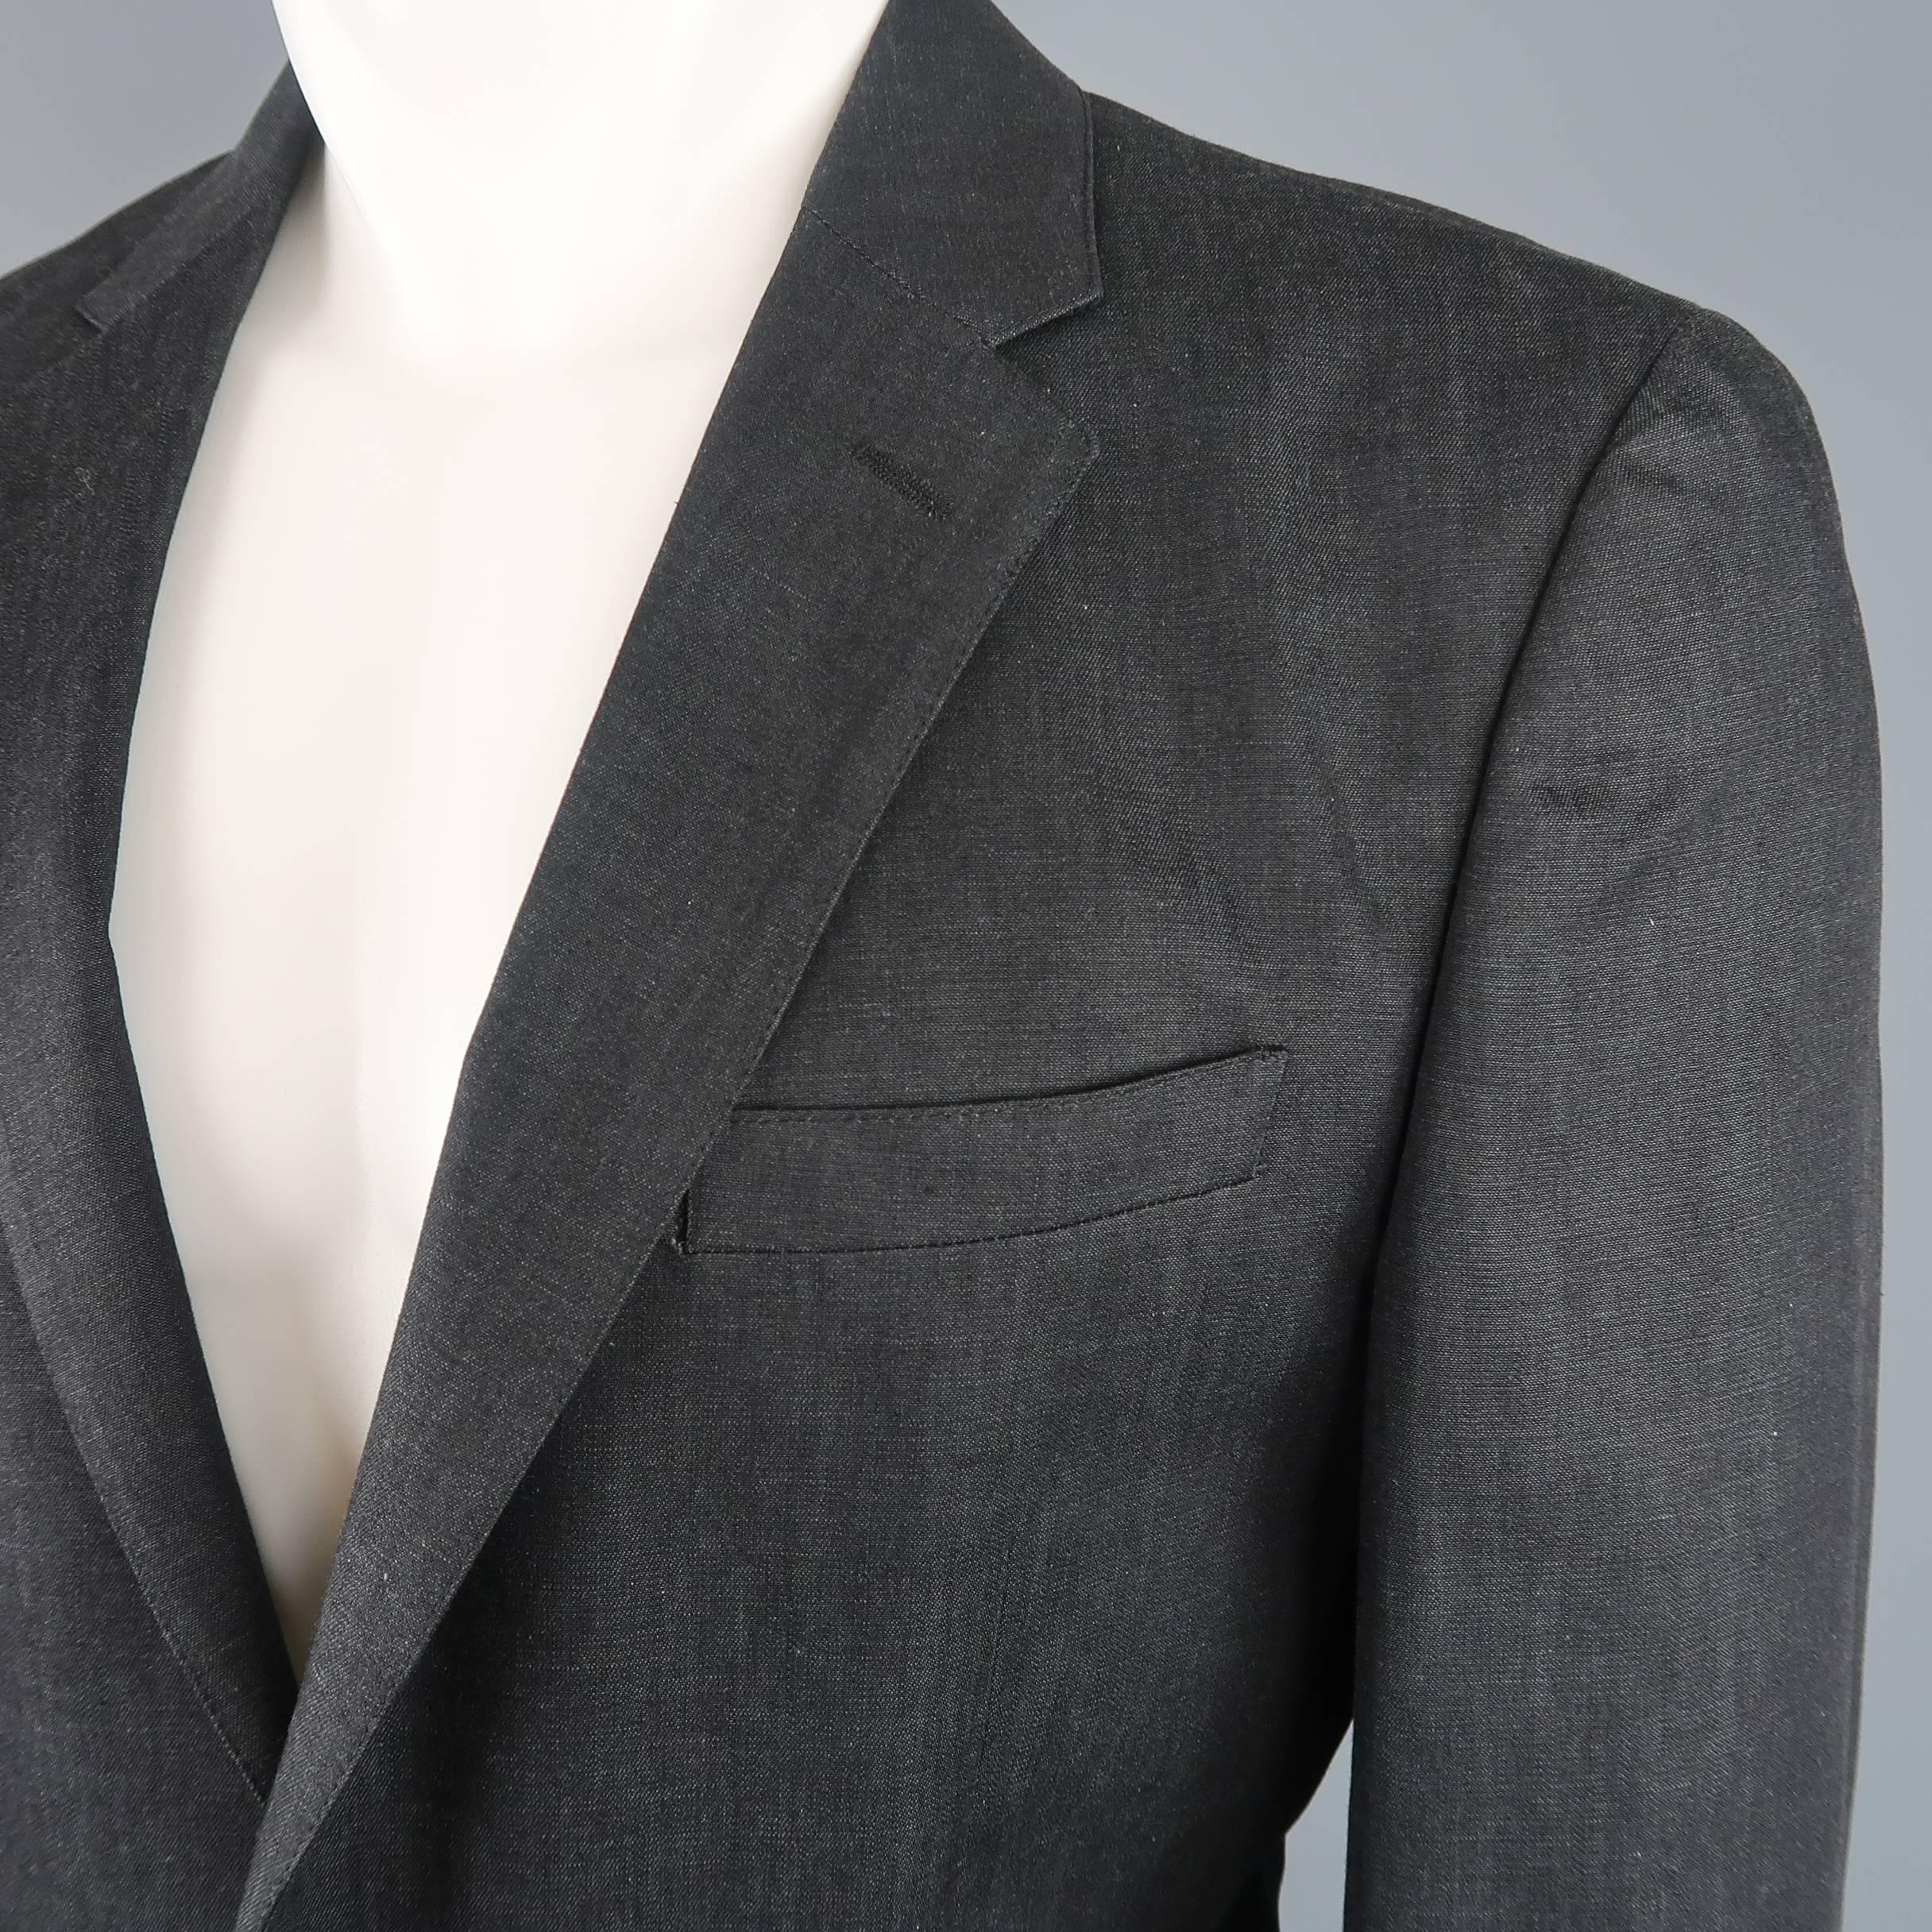 Single breasted PRADA sport coat comes in black linen textured cotton with a notch lapel, two button front, and patch pockets. Made in Italy.
 
Good Pre-Owned Condition.
Marked: IT 52
 
Measurements:
 
Shoulder: 17 in.
Chest: 42 in.
Sleeve: 26